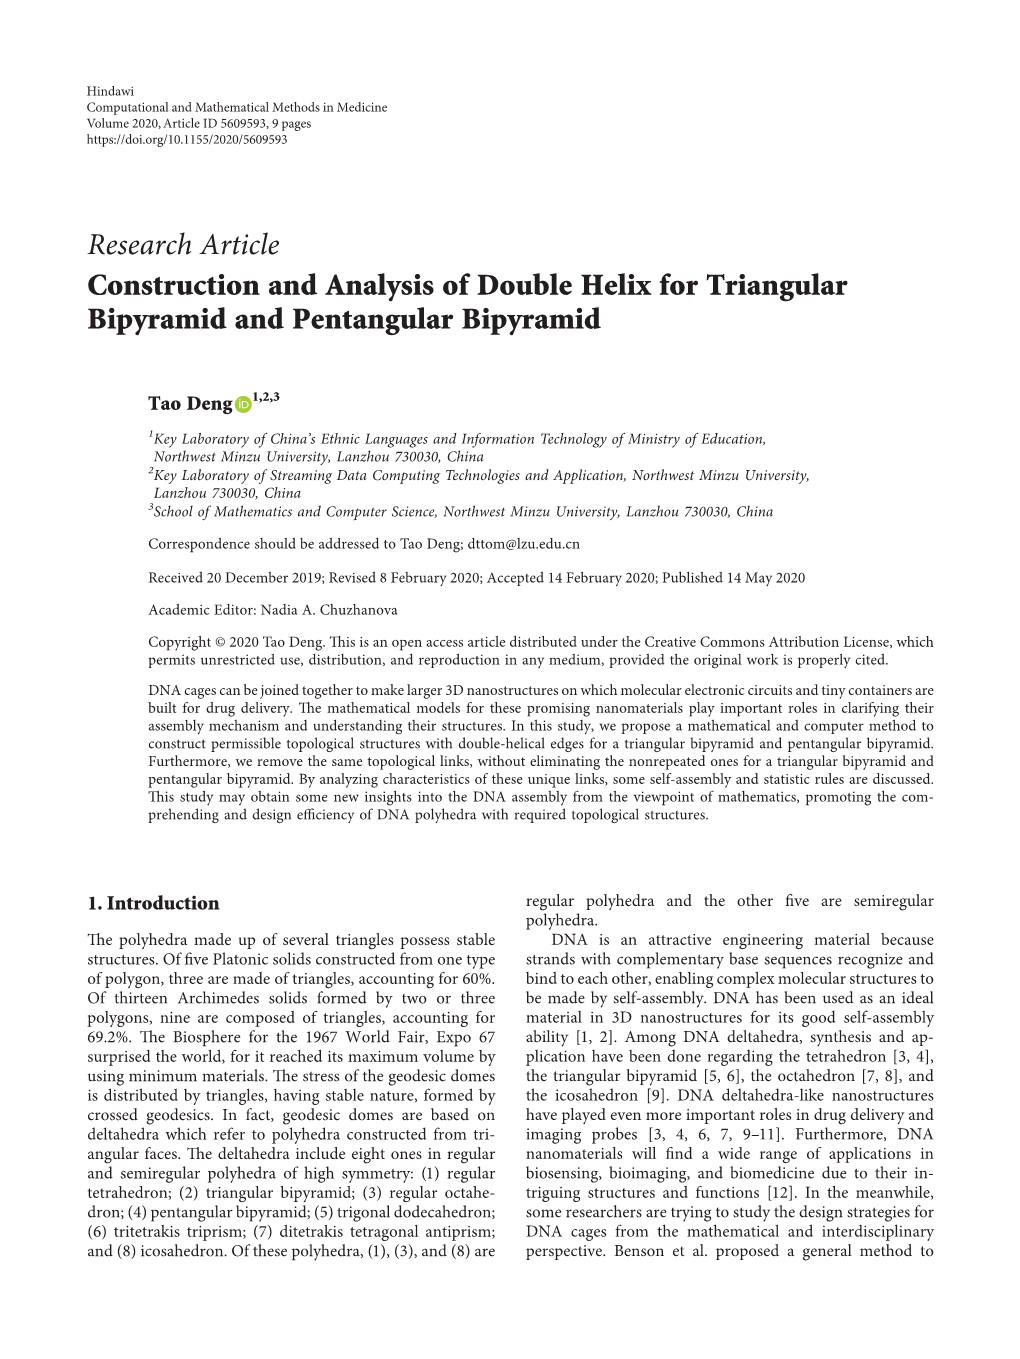 Research Article Construction and Analysis of Double Helix for Triangular Bipyramid and Pentangular Bipyramid